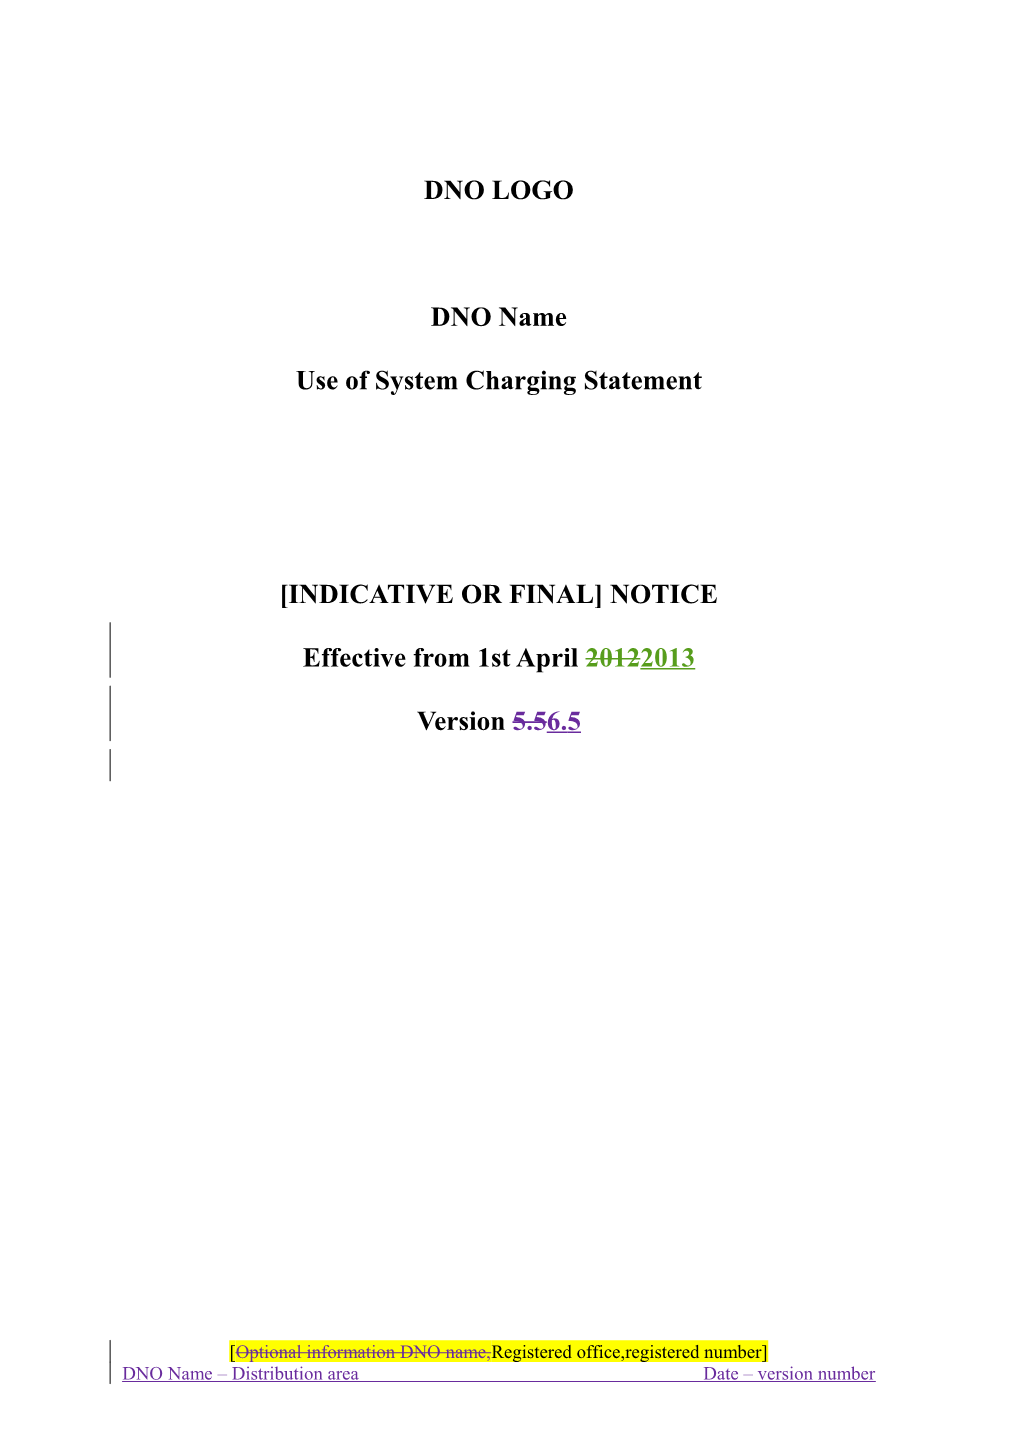 Use of System Charging Statement